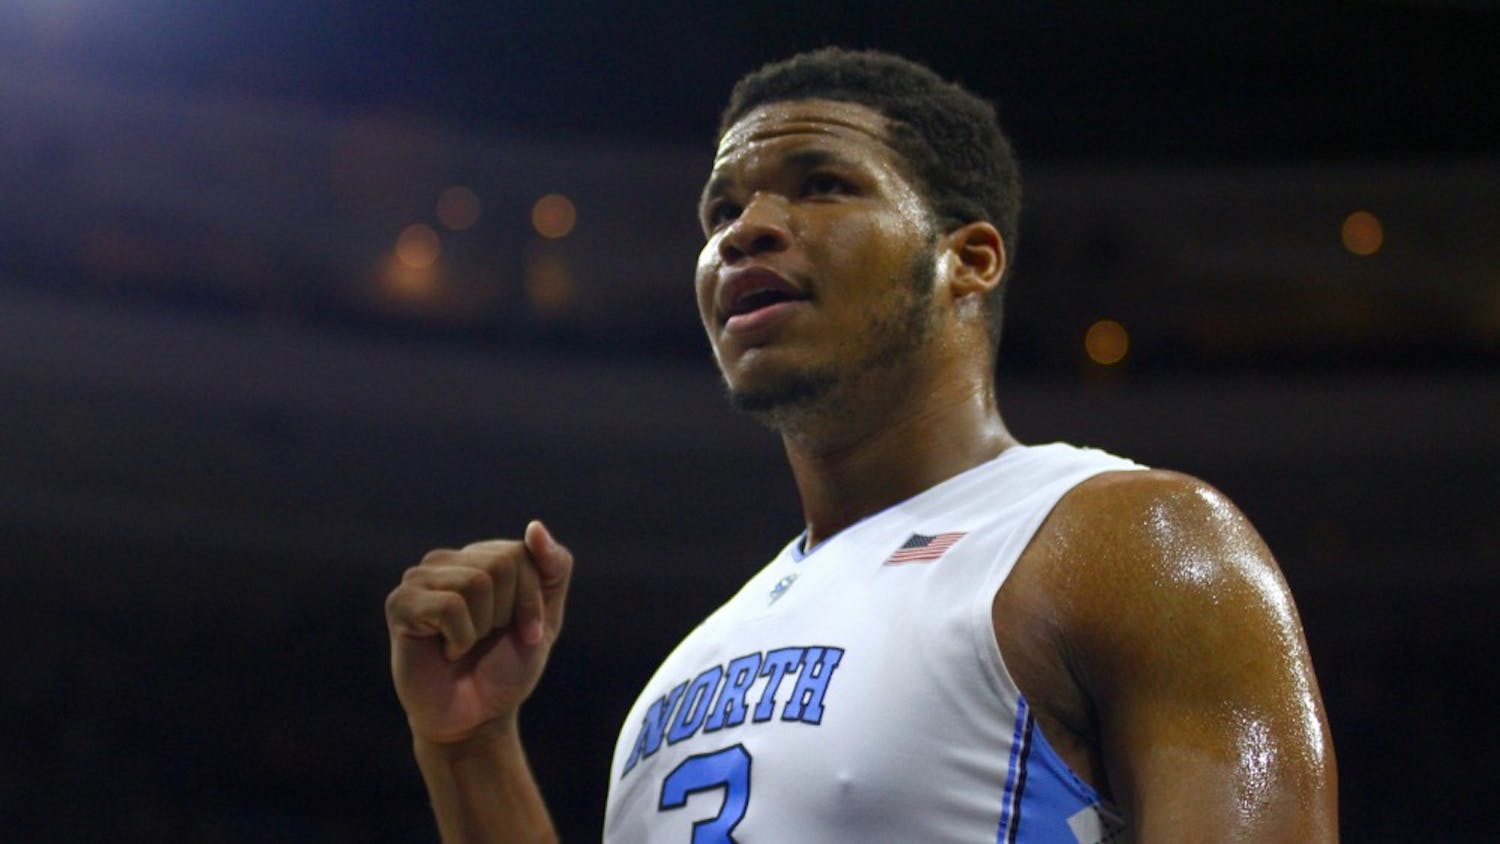 Kennedy Meeks (3) celebrates a call made in UNC's favor during the second half.